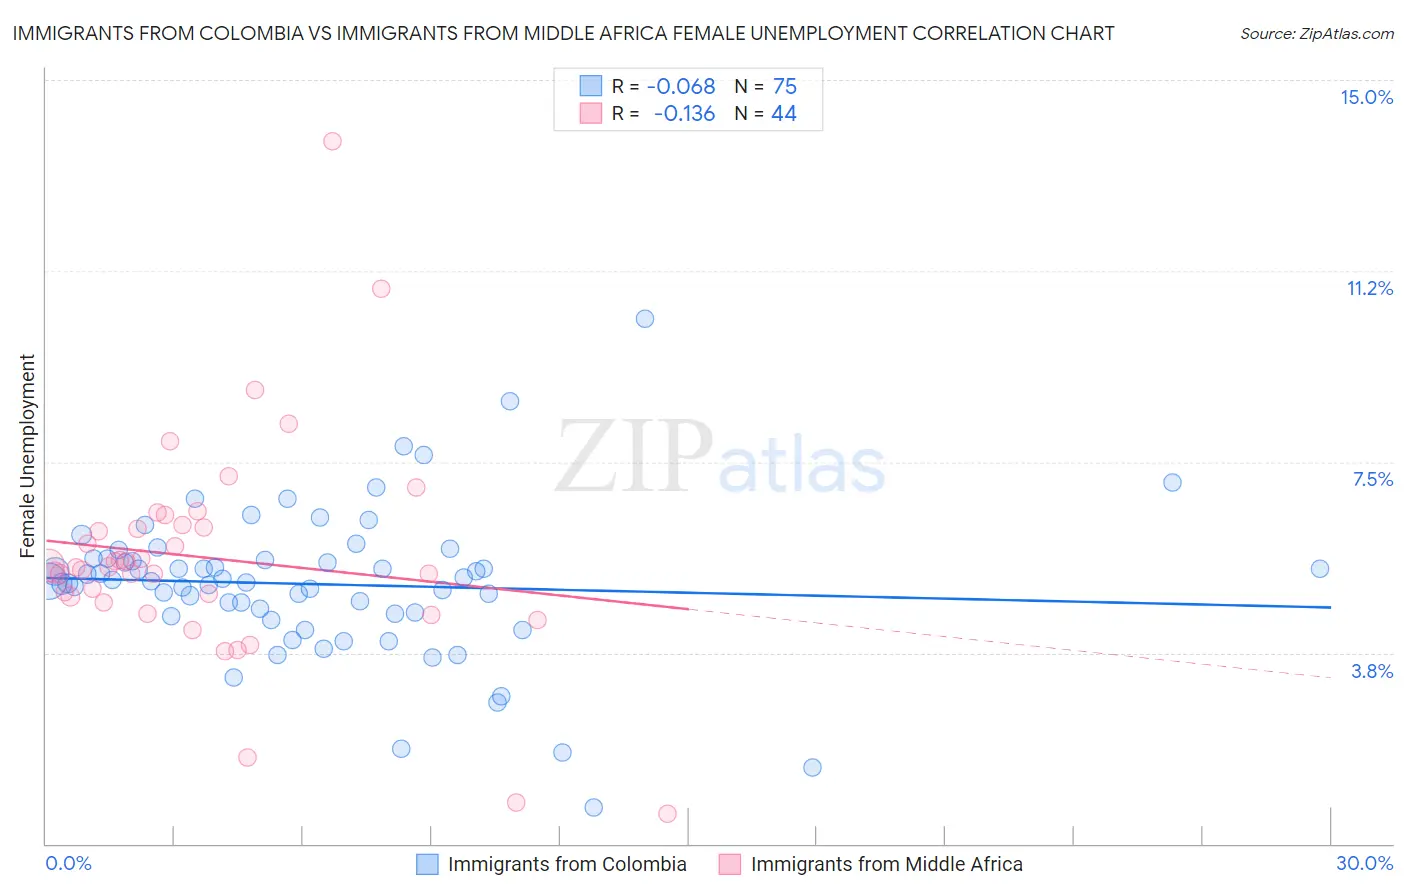 Immigrants from Colombia vs Immigrants from Middle Africa Female Unemployment